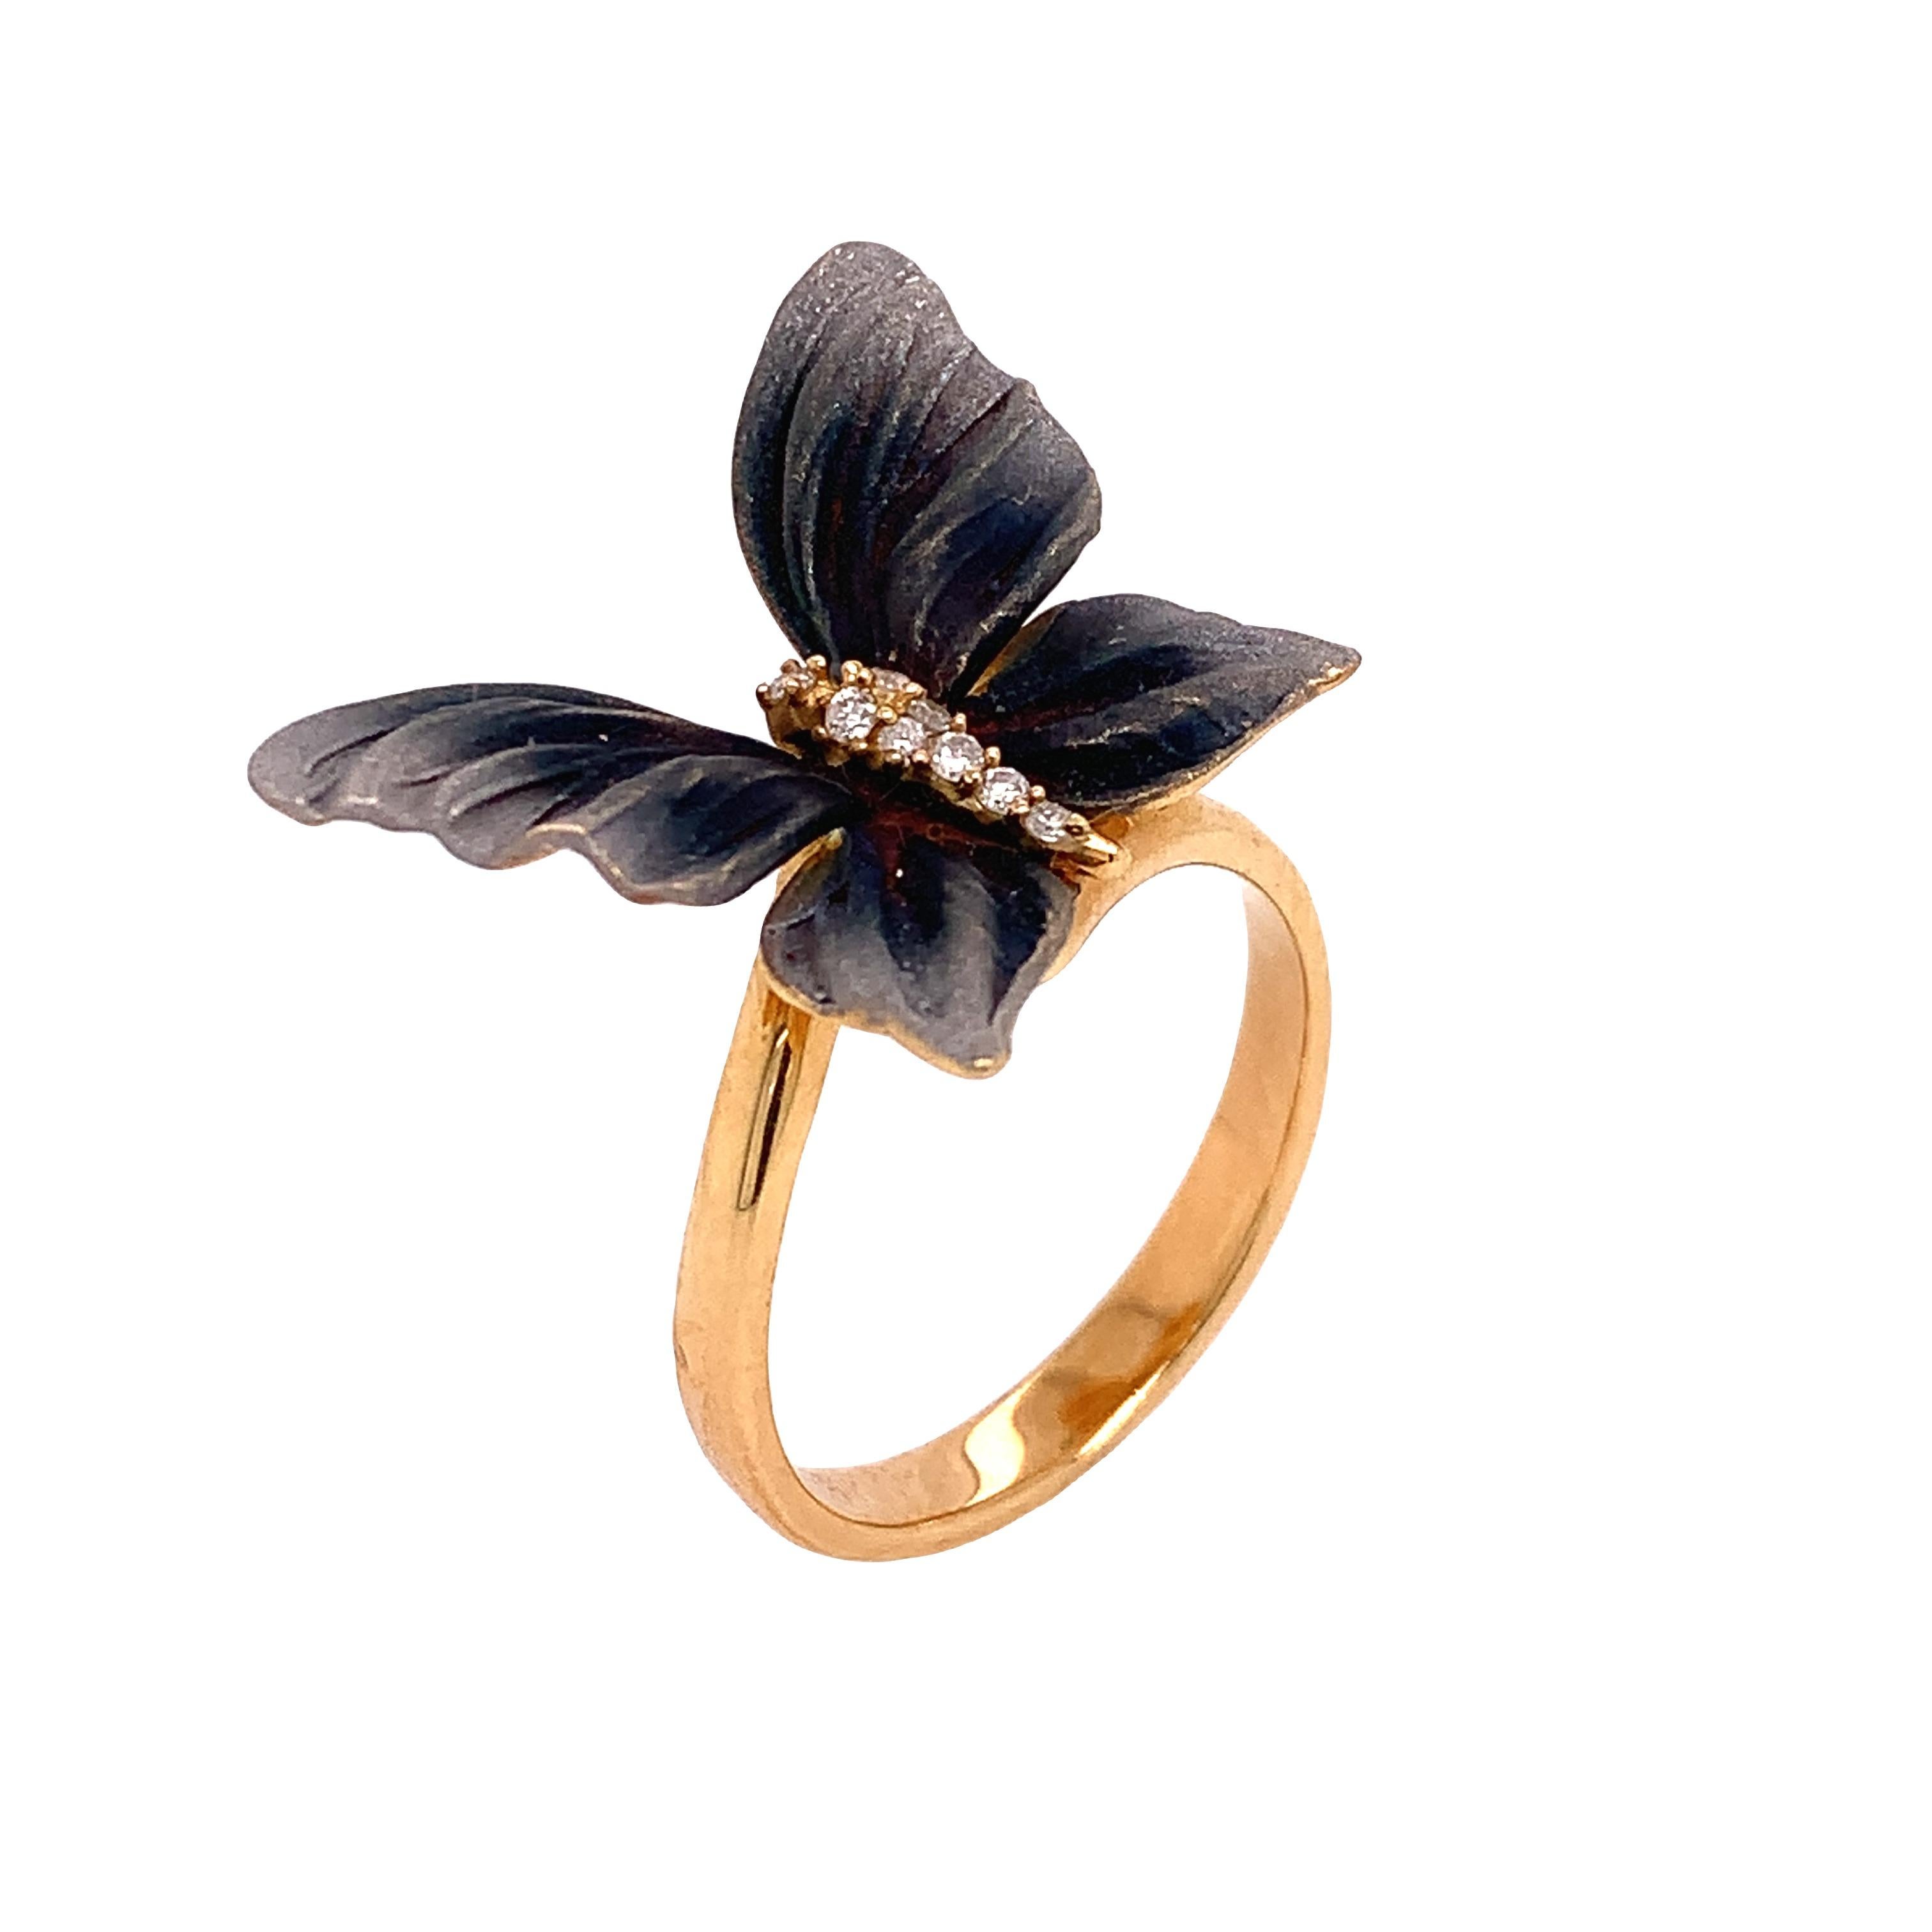 Gray-Brown Collection

Butterfly tainted gray rhodium ring with Diamonds set in 18K yellow gold.

Diamond: 0.05ct total weight.
All diamonds are G-H/ SI stones.
